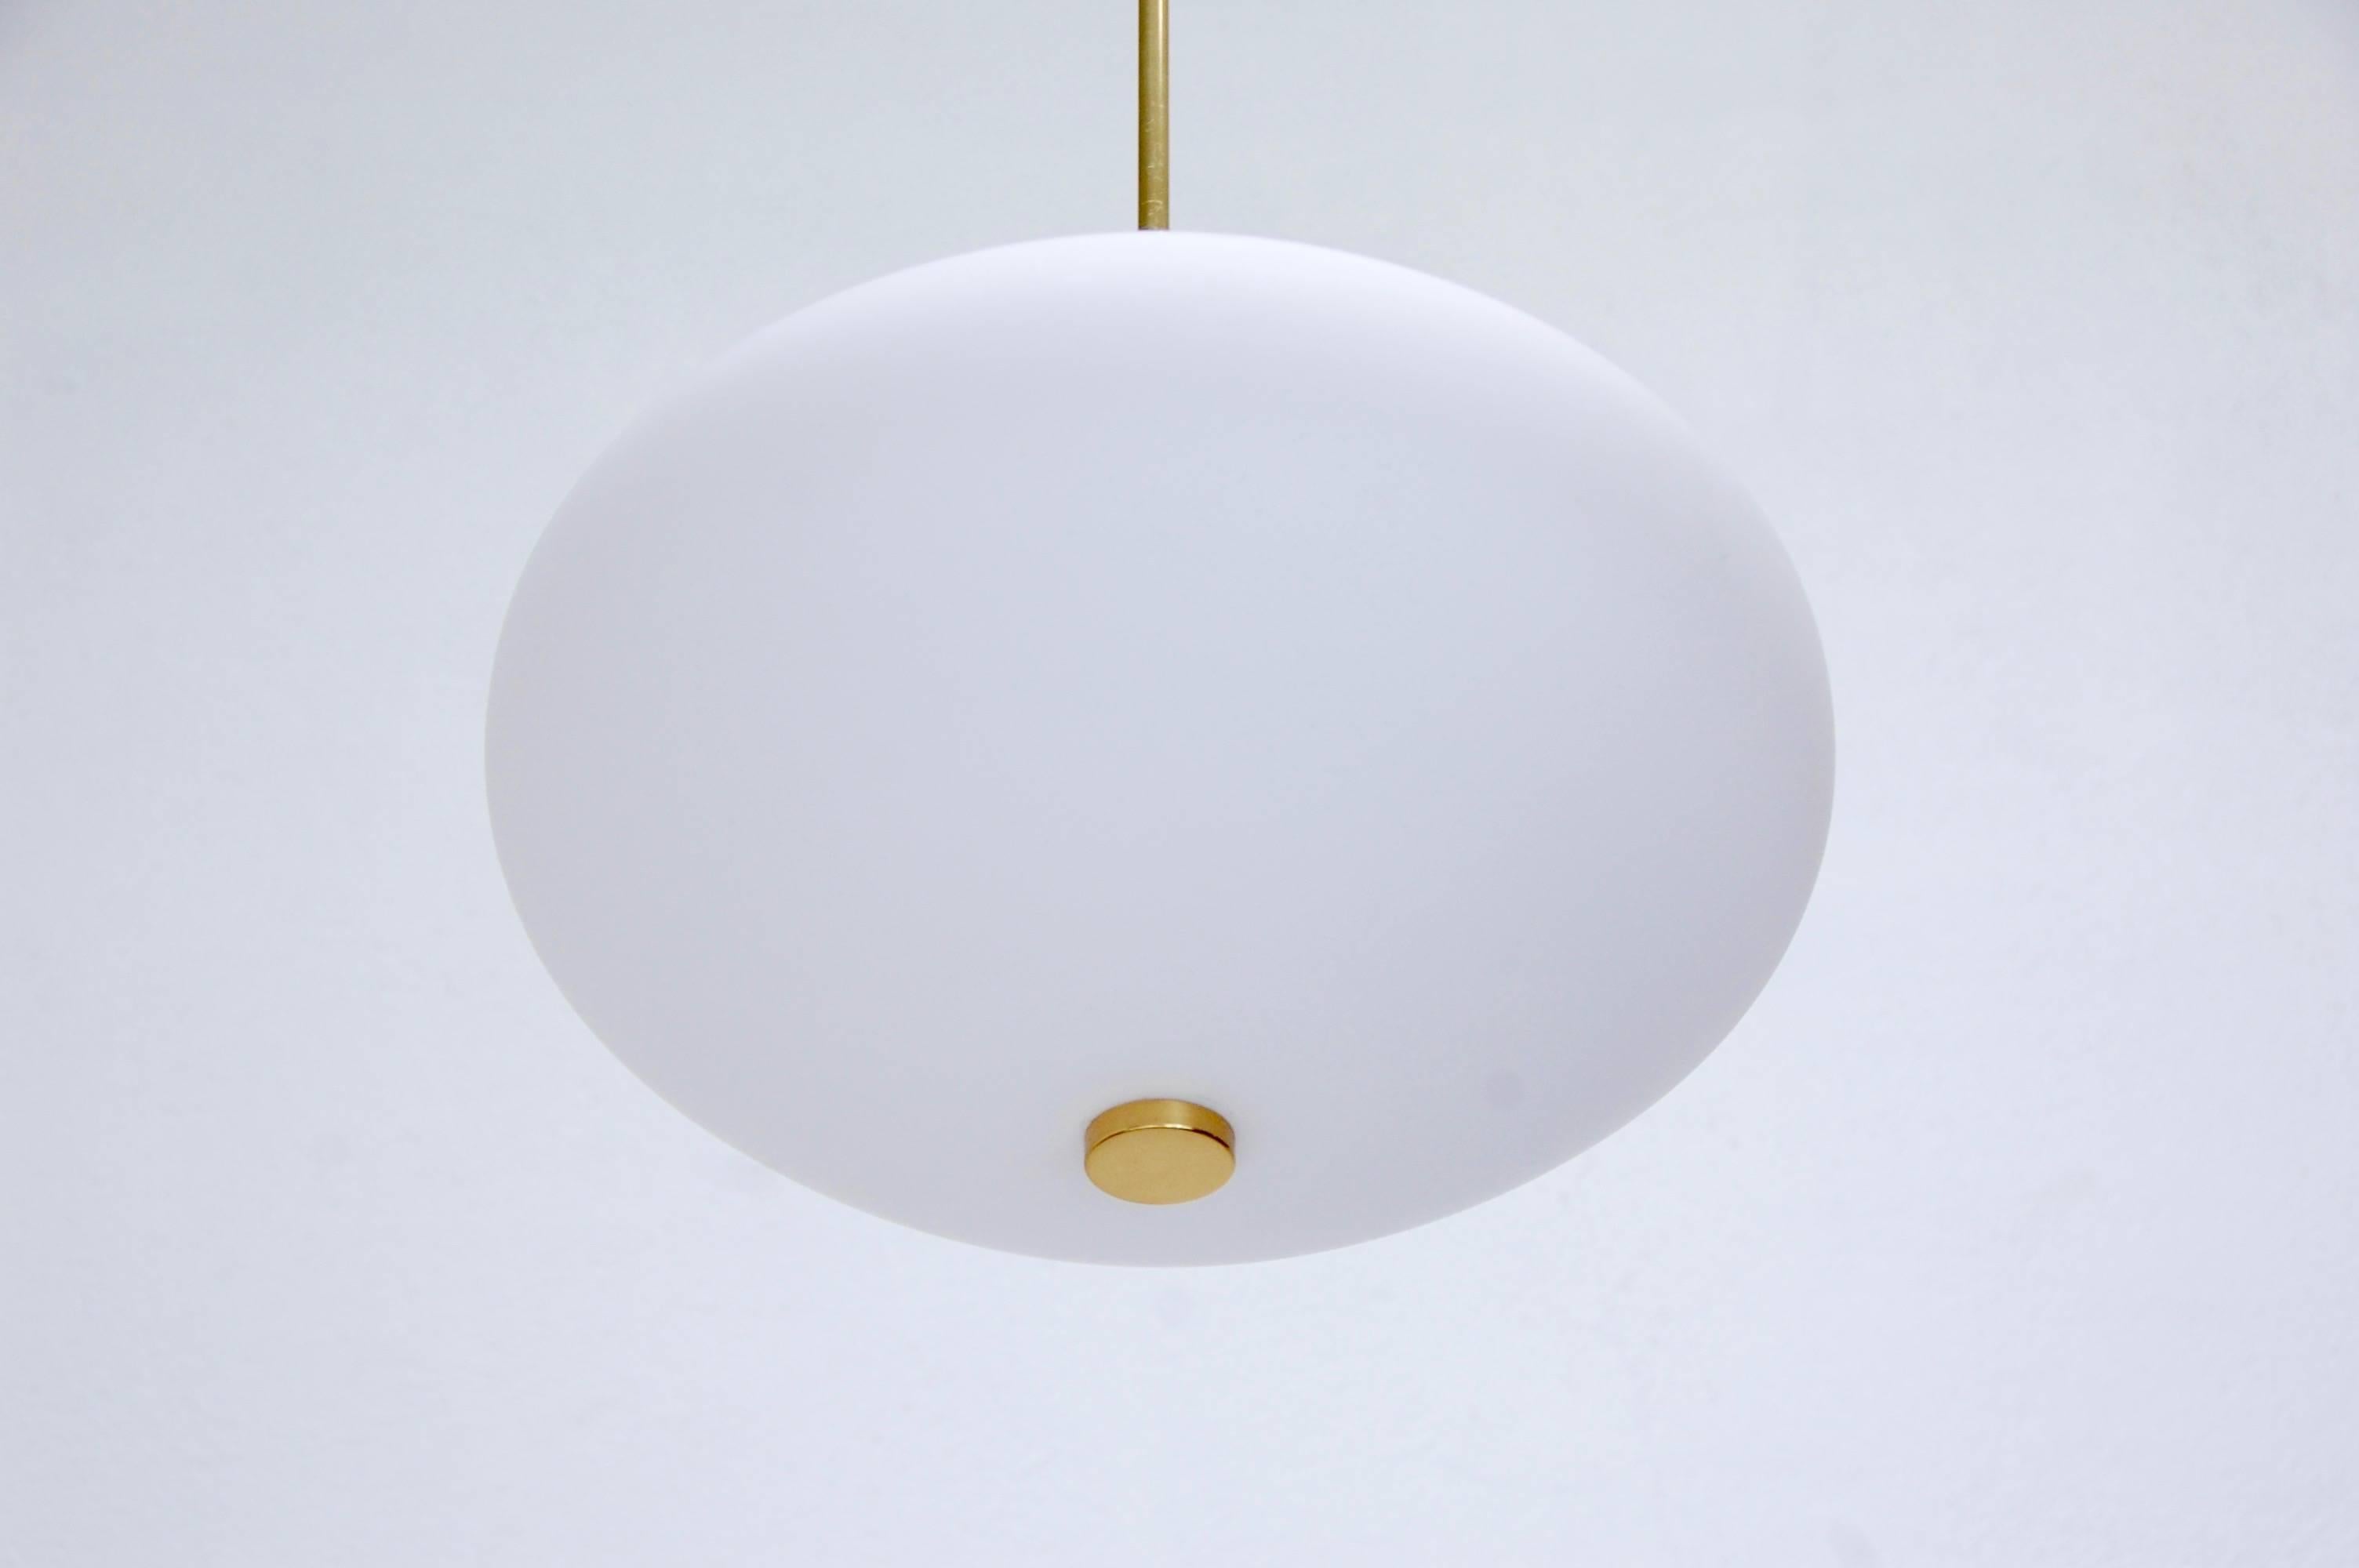 Five exquisite ellipsoid black and white Mid-Century pendants from Italy in blown glass and brass details. Overall drop can be adjusted upon request.
Fixture height: 30”.
Diameter: 14”.
Shade Height: 9”.
Please check for lead time on these as they